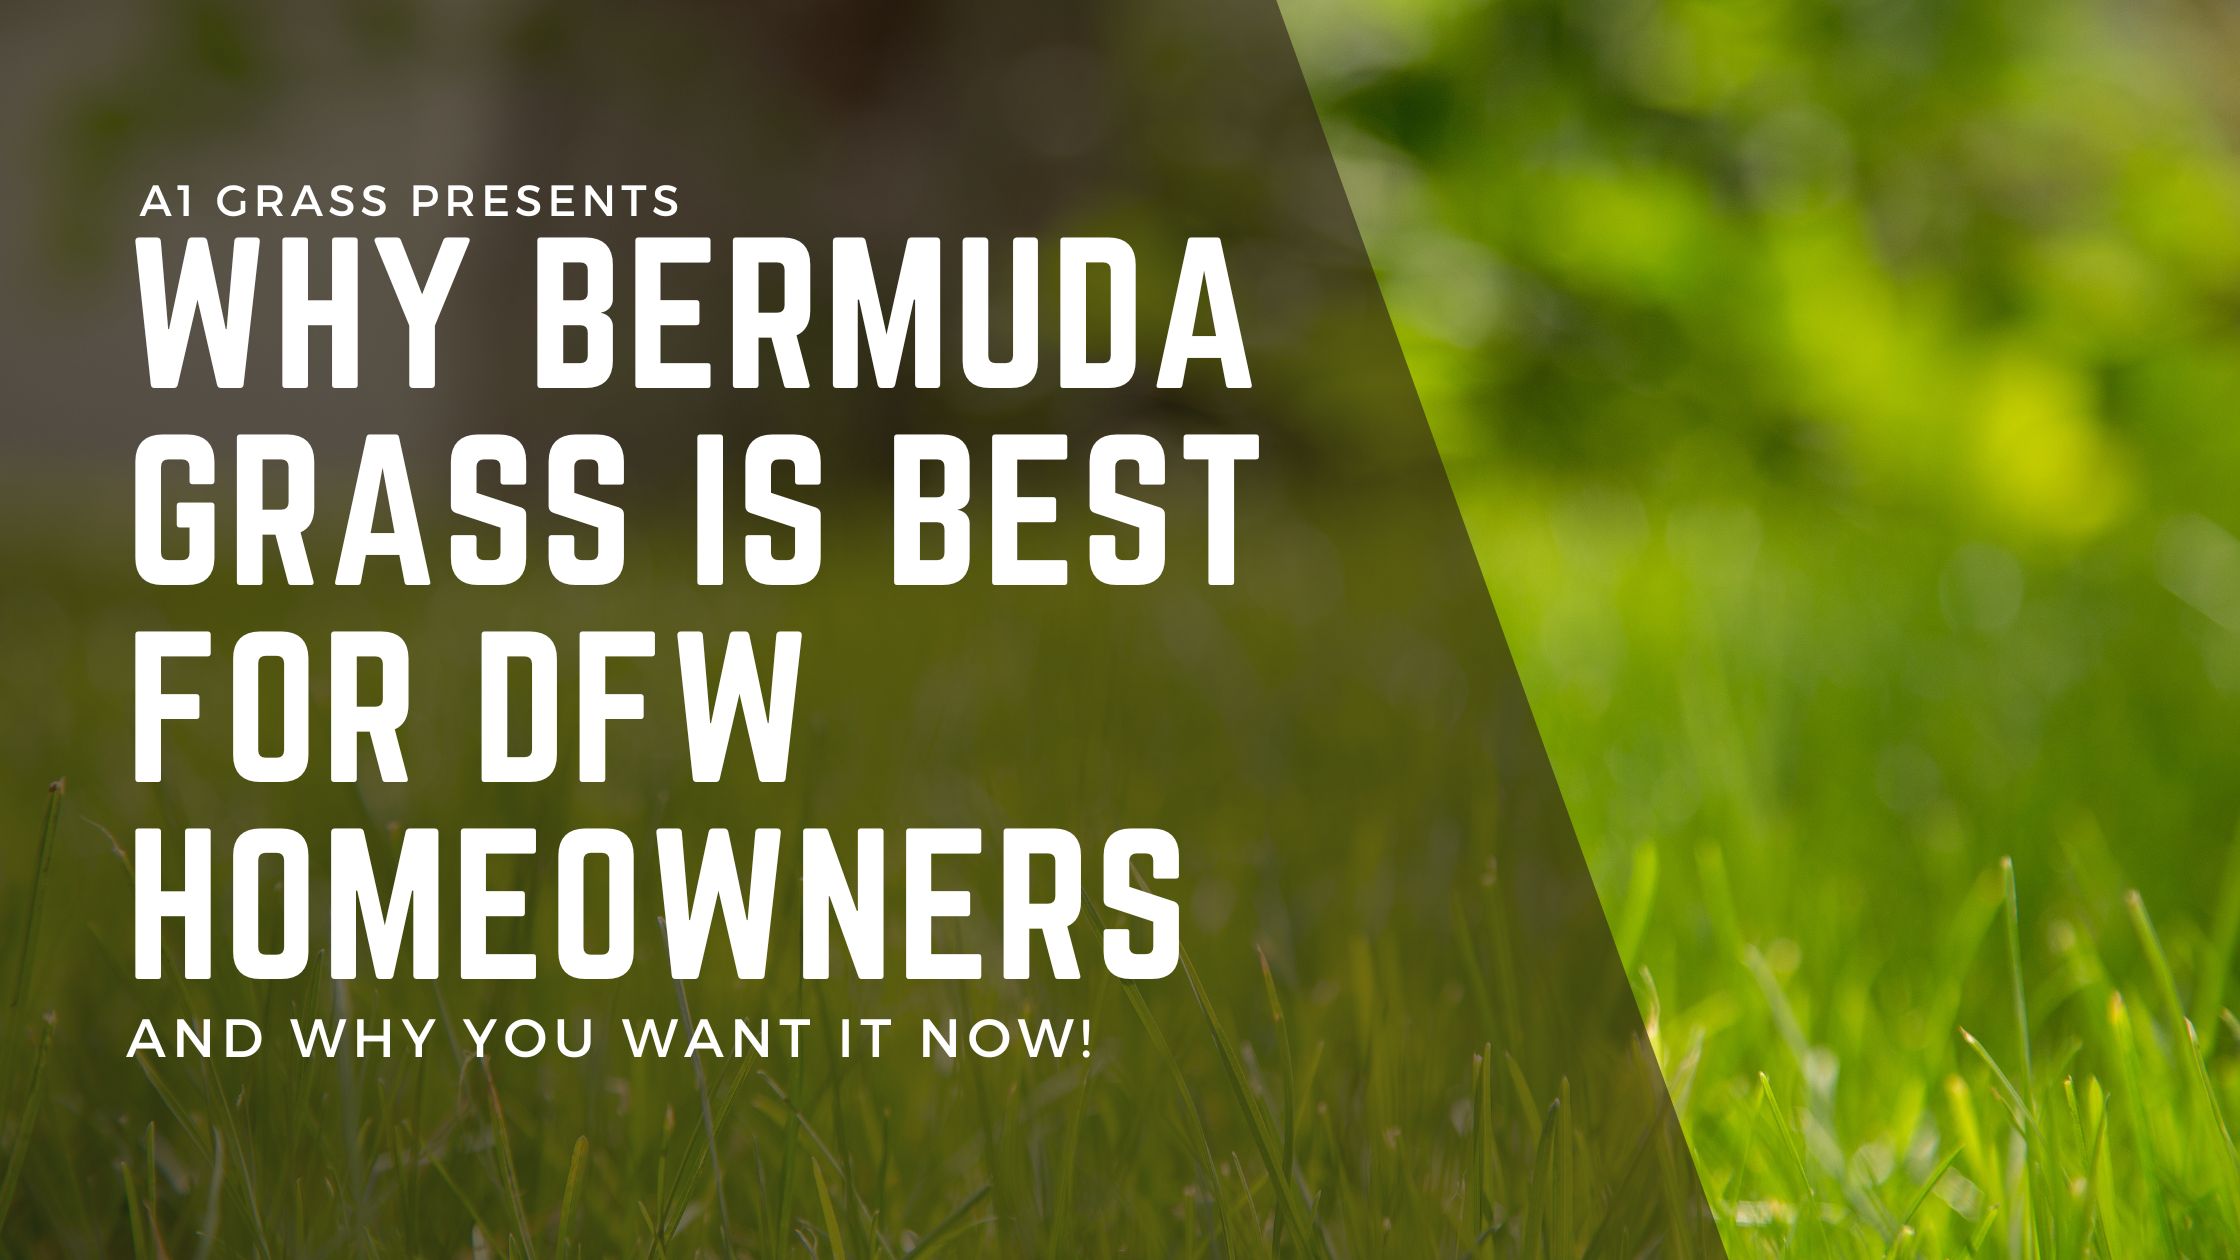 Why Bermuda grass is best for dfw homeowners